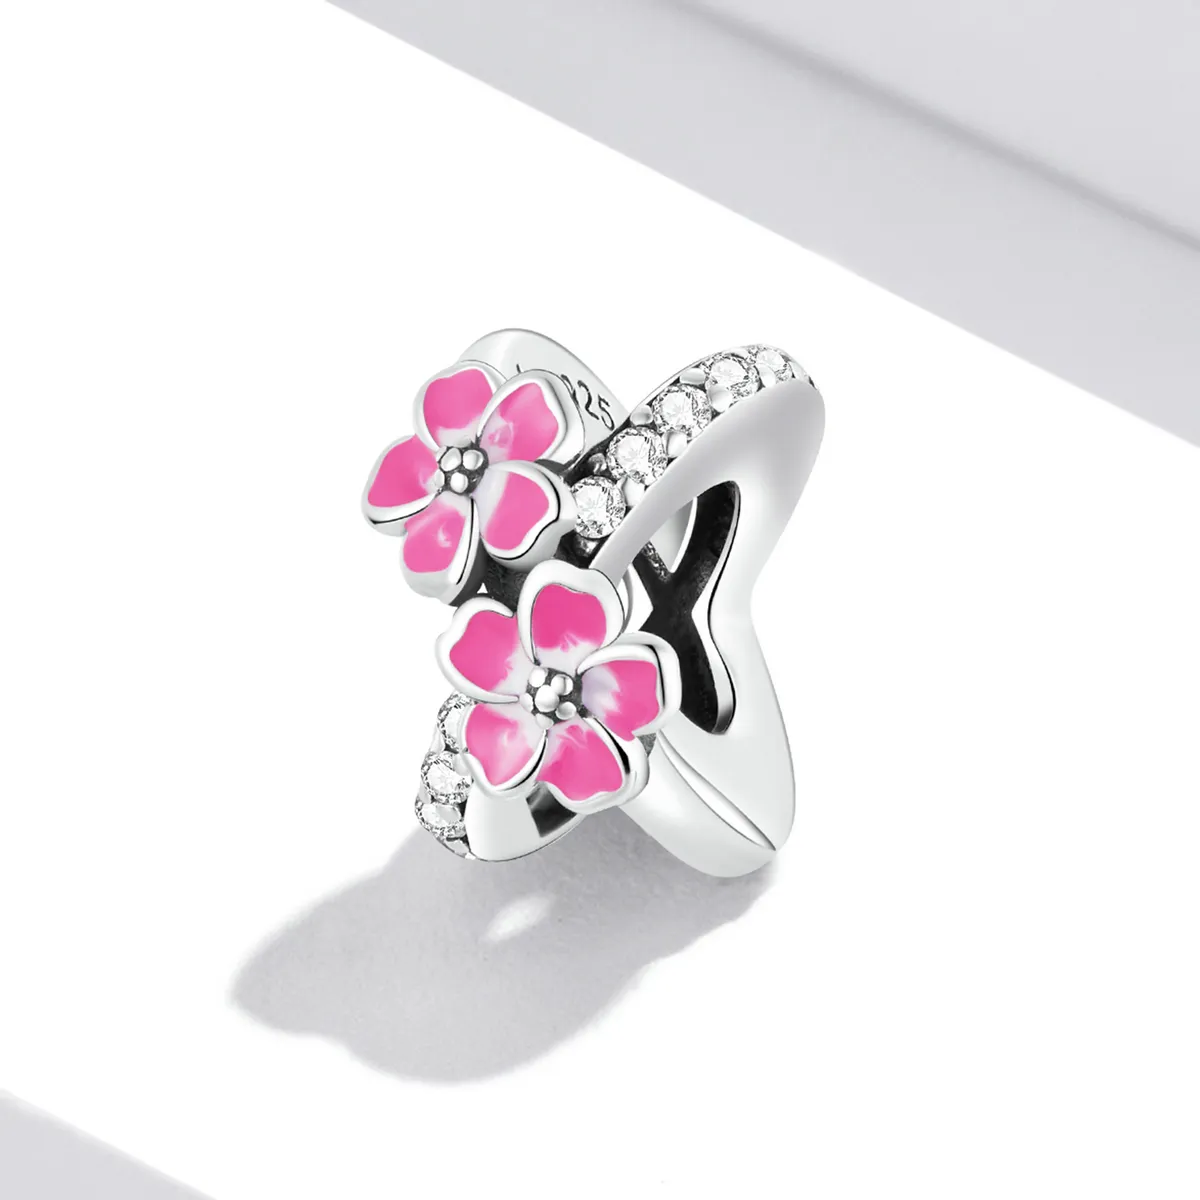 Pandora Style Pink Flowers Spacer Charm - SCC2139